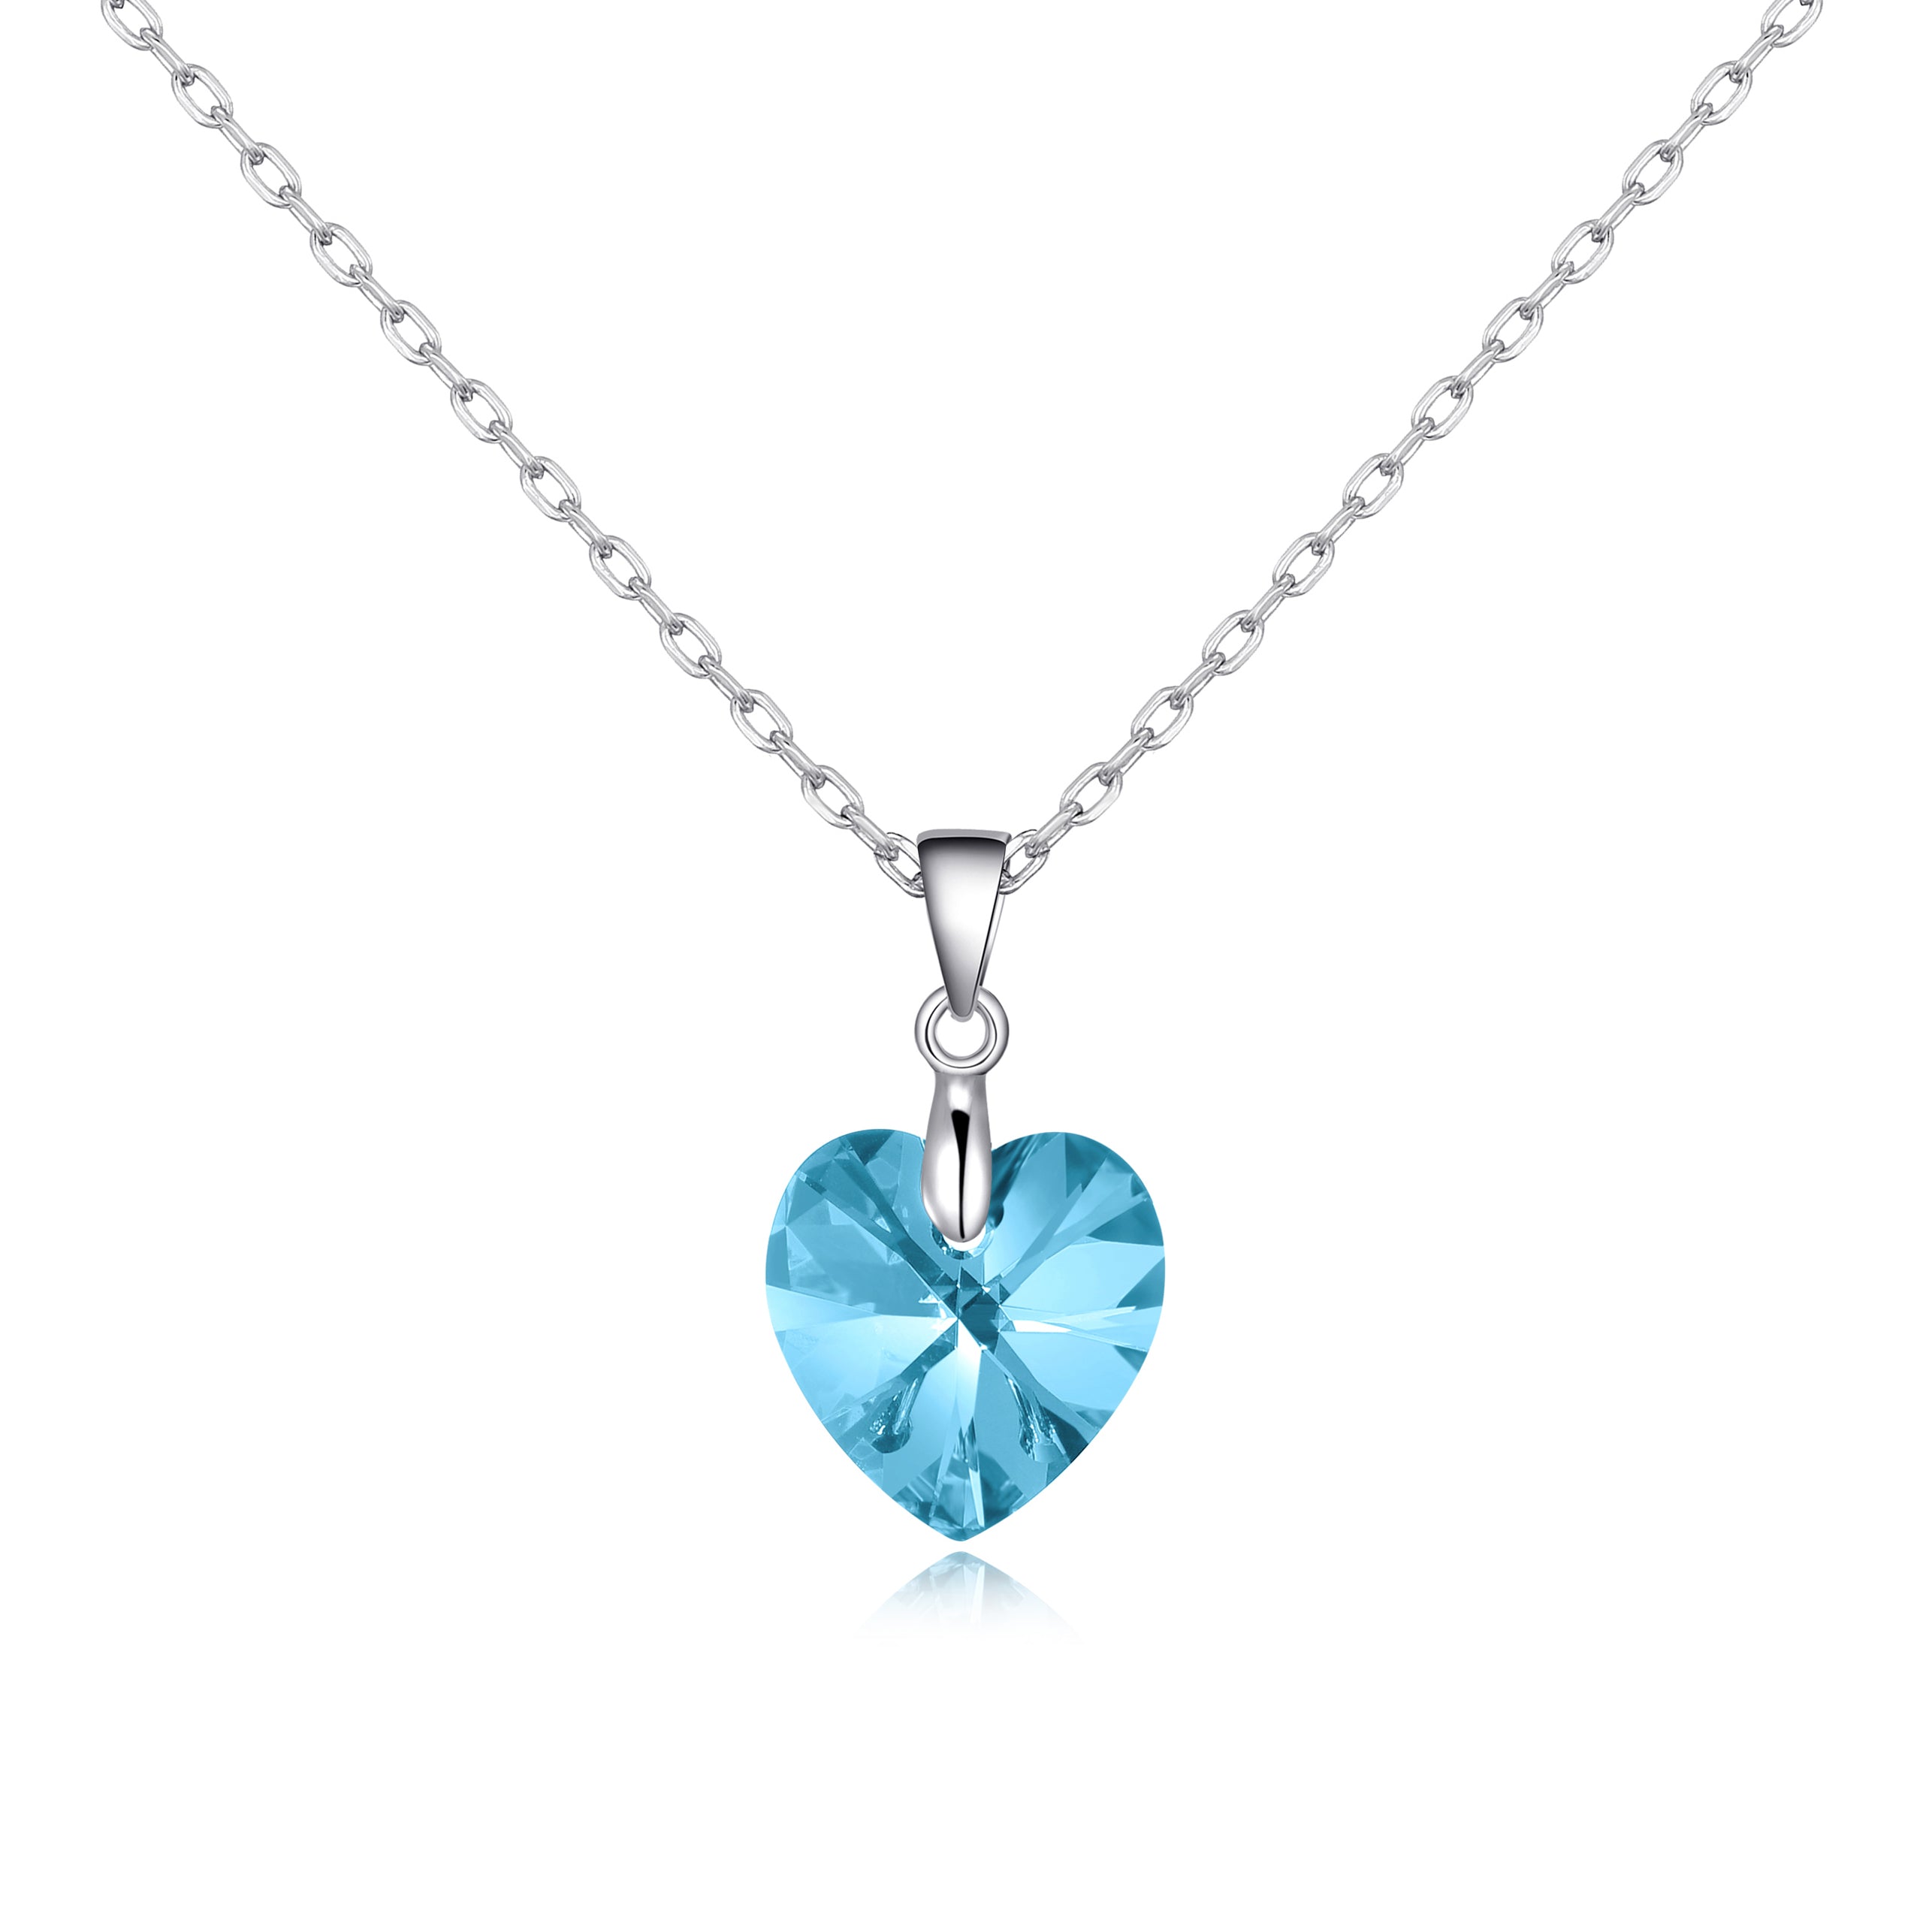 Sterling Silver Aquamarine Heart Necklace Created with Zircondia® Crystals by Philip Jones Jewellery